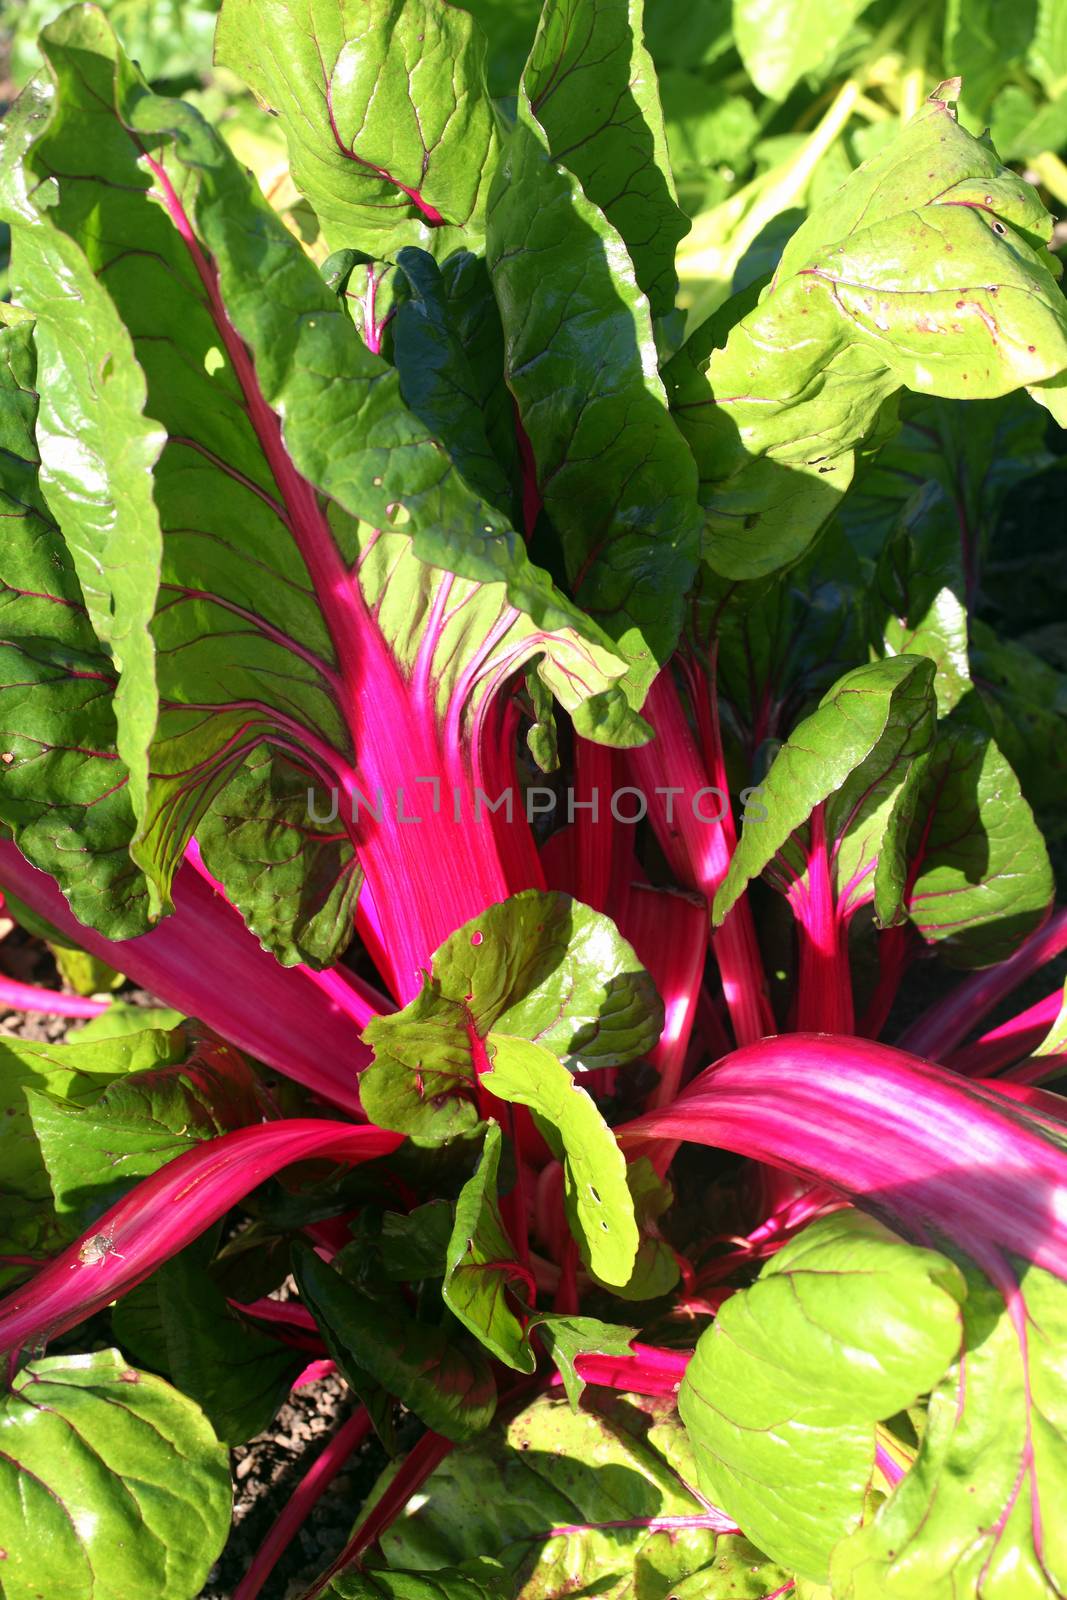 Swiss chard, Beta vulgaris subsp Cicla var flavescens 'Pink Passion' a vegetable salad crop food with health diet benefits stock photo